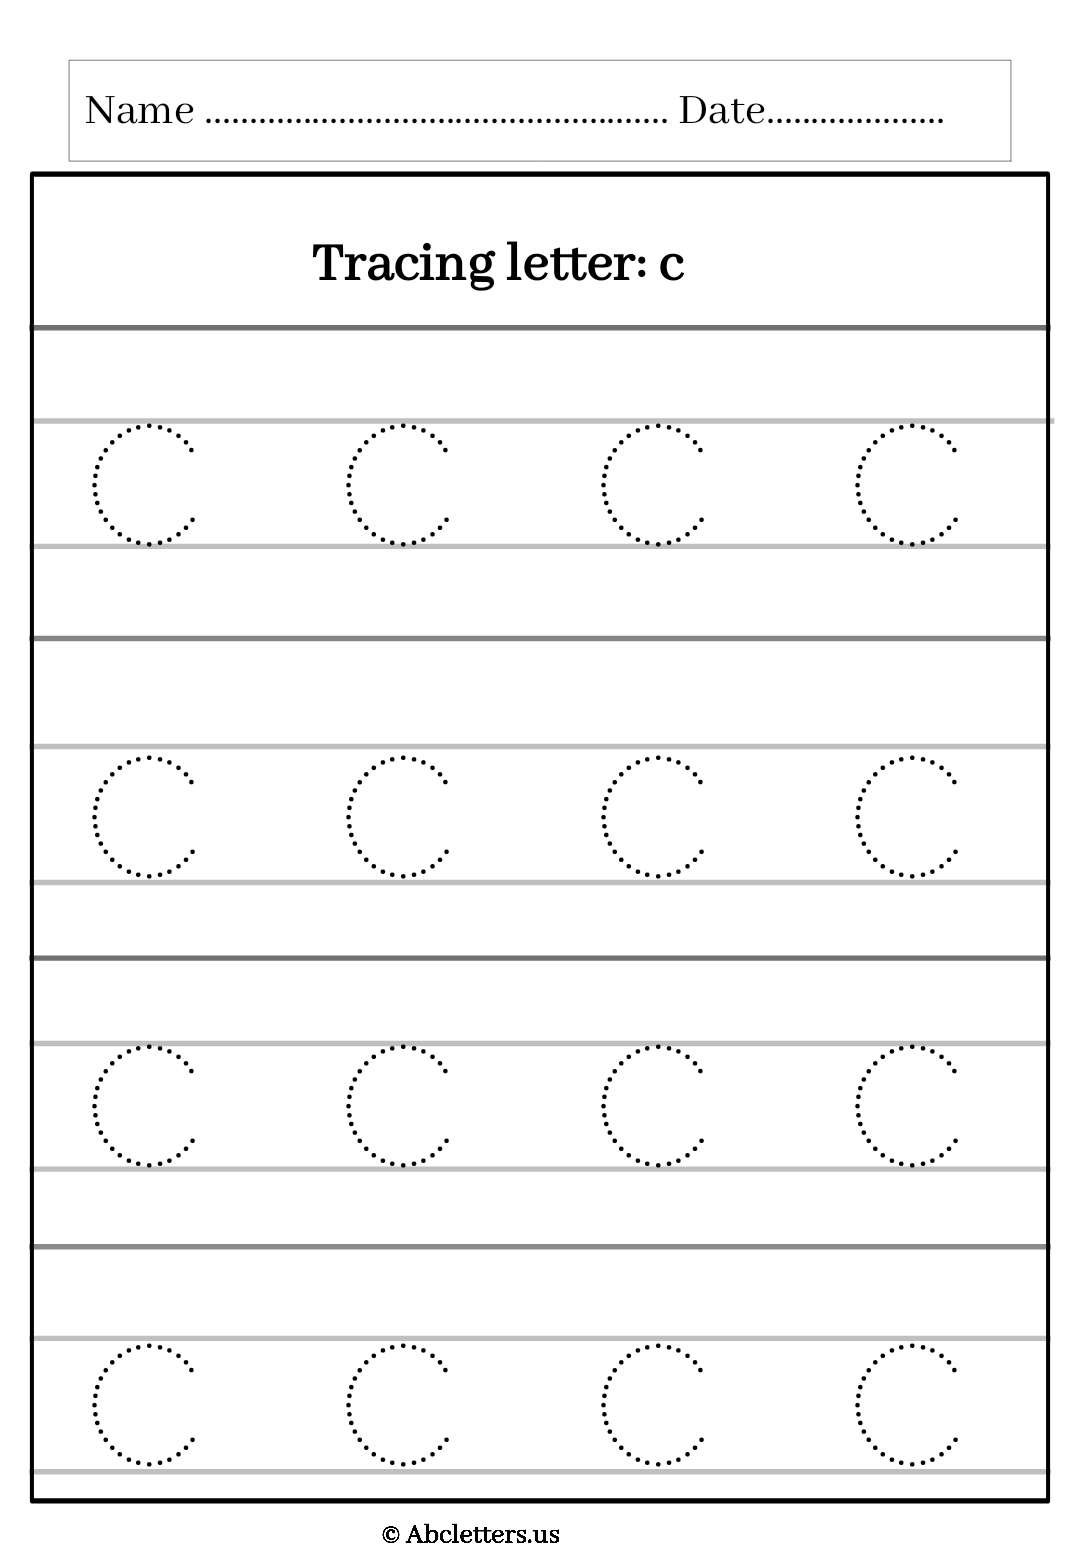 Tracing letter lowercase C with 3 lines